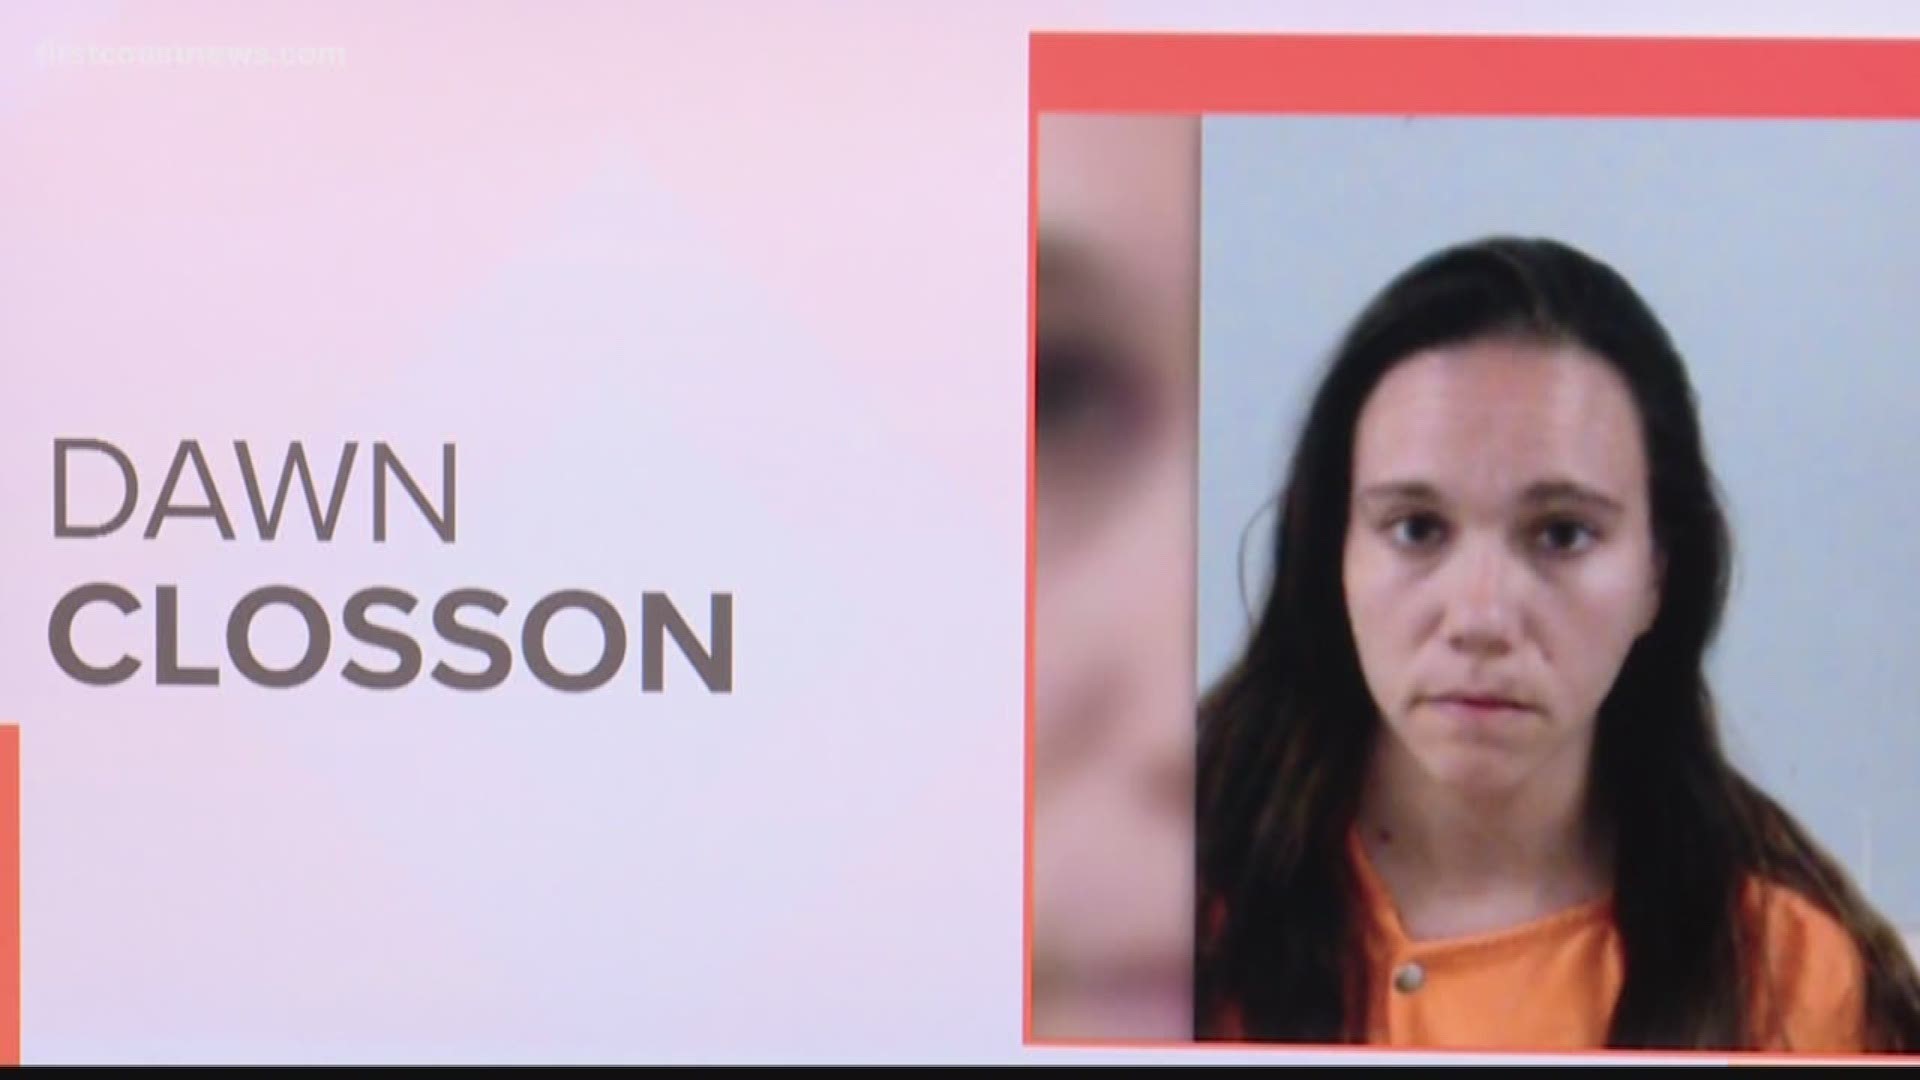 KSL 5 TV, the NBC station in Utah, originally reported that police in Enoch were searching for a missing juvenile by the name of Ariana Bozeman back in August. They say that Bozeman's father had custody of Ariana but her mother Dawn Closson, 34, took her out of the area.